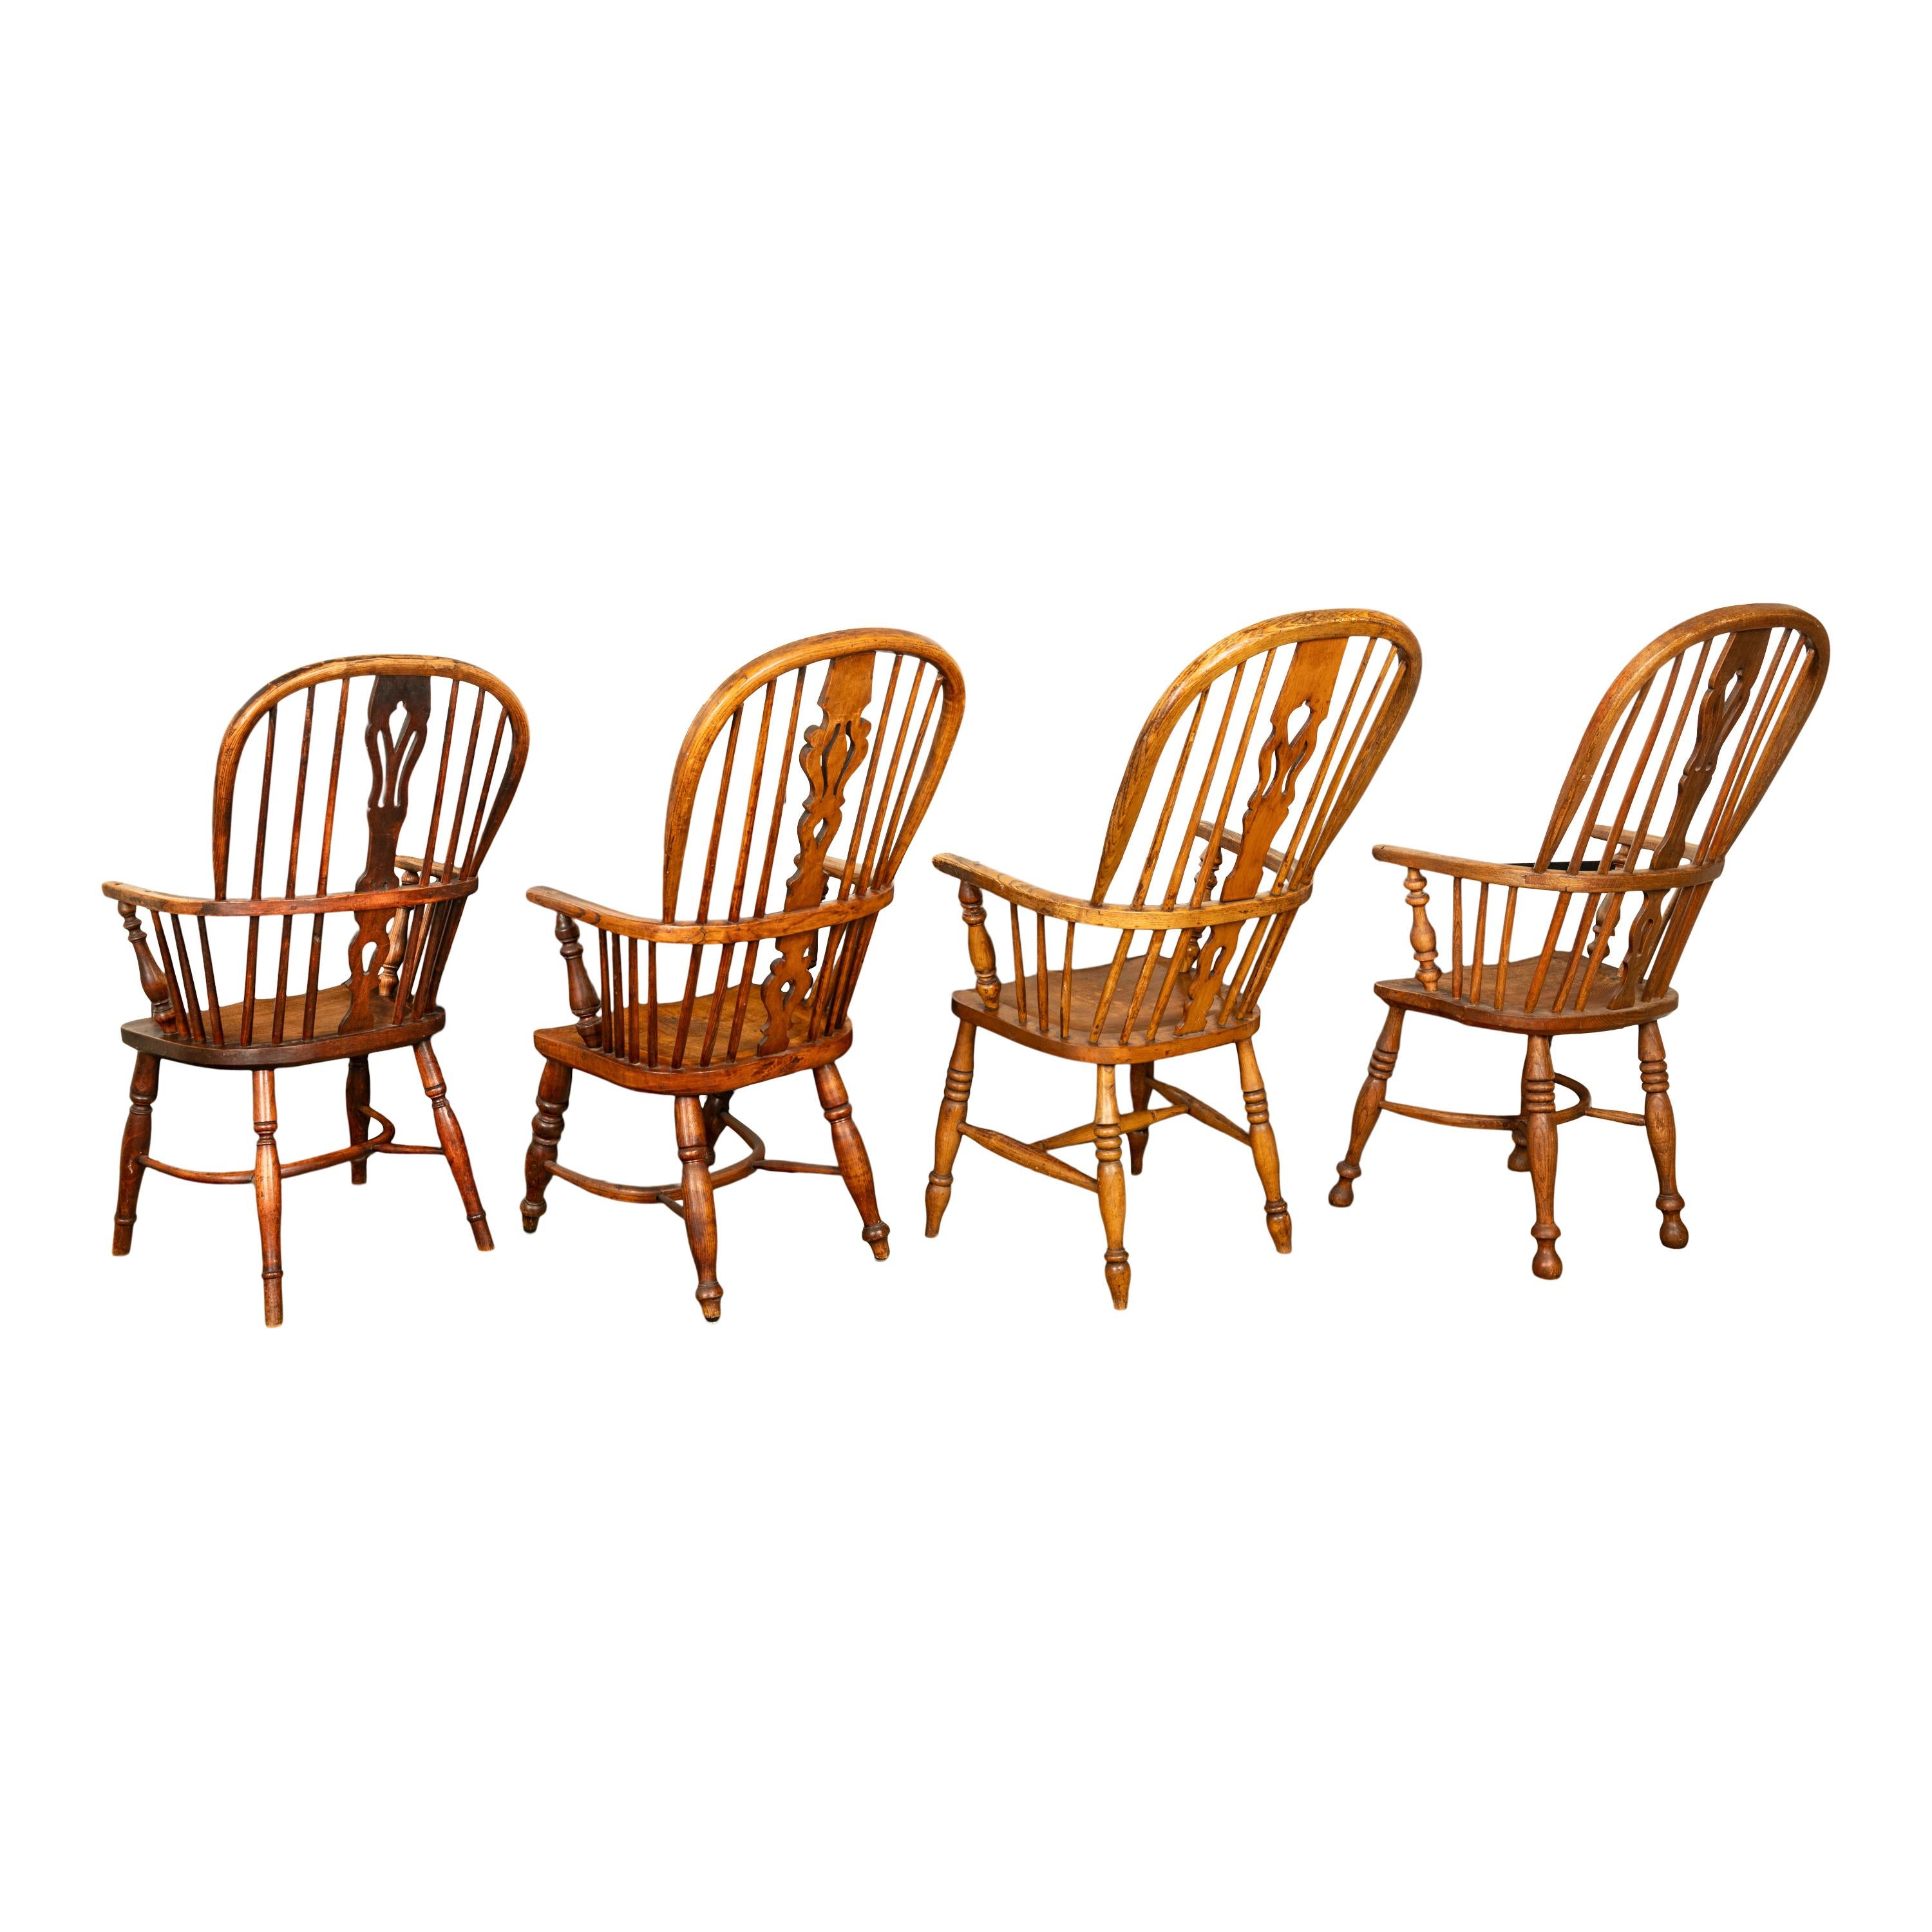 Set 4 Antique 19thC High-backed English Ash Elm Country Windsor Arm Chairs 1840  For Sale 2